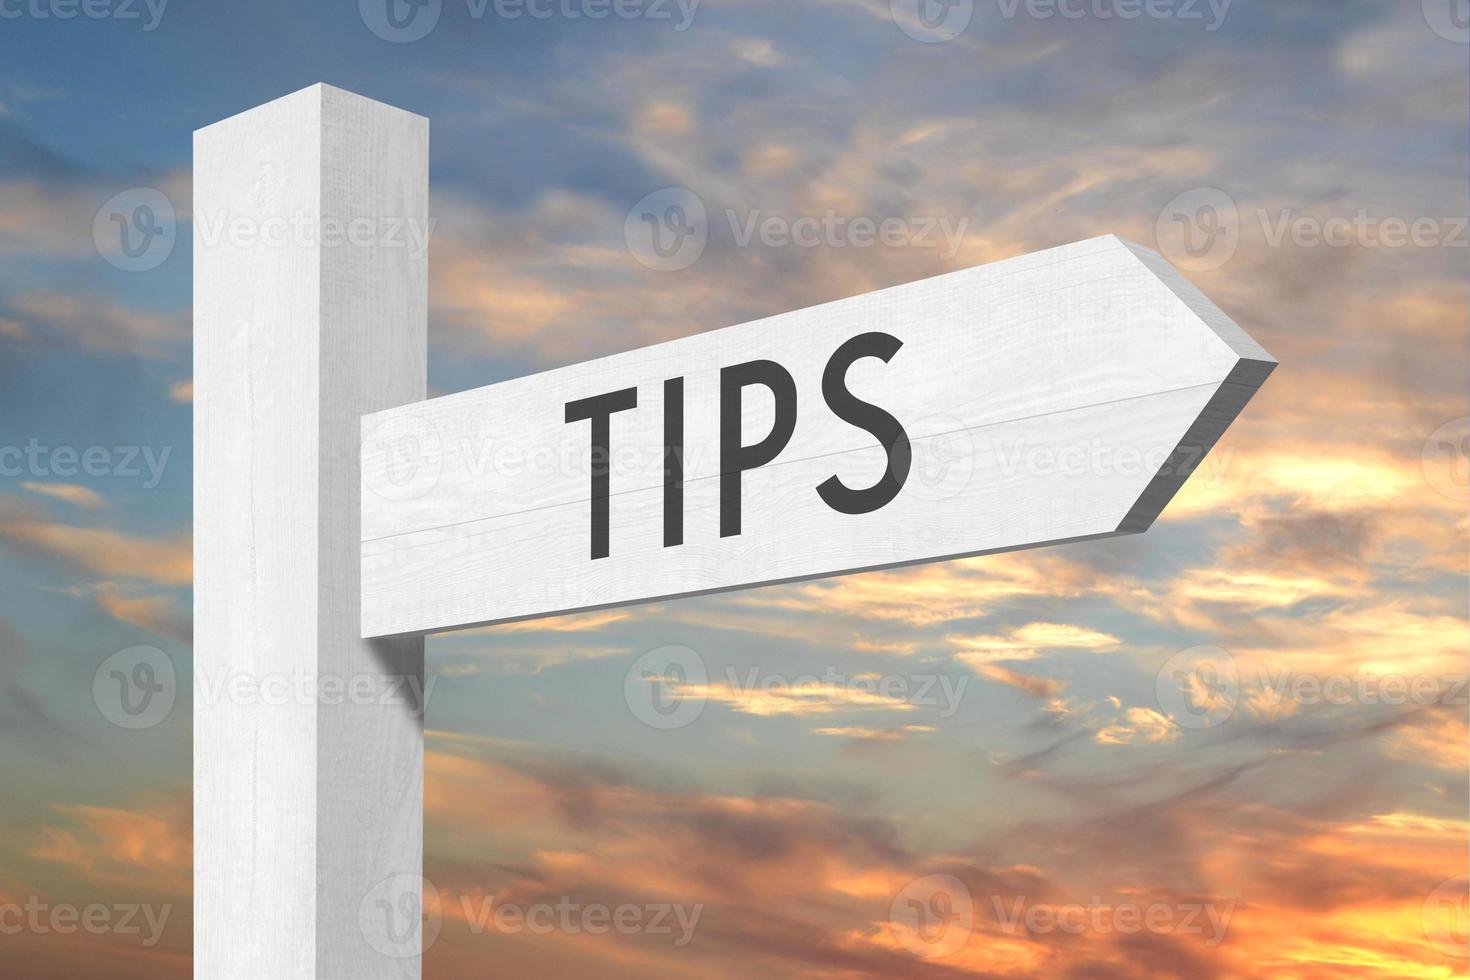 Tips - White Wooden Signpost with one Arrow and Sunset Sky in Background photo